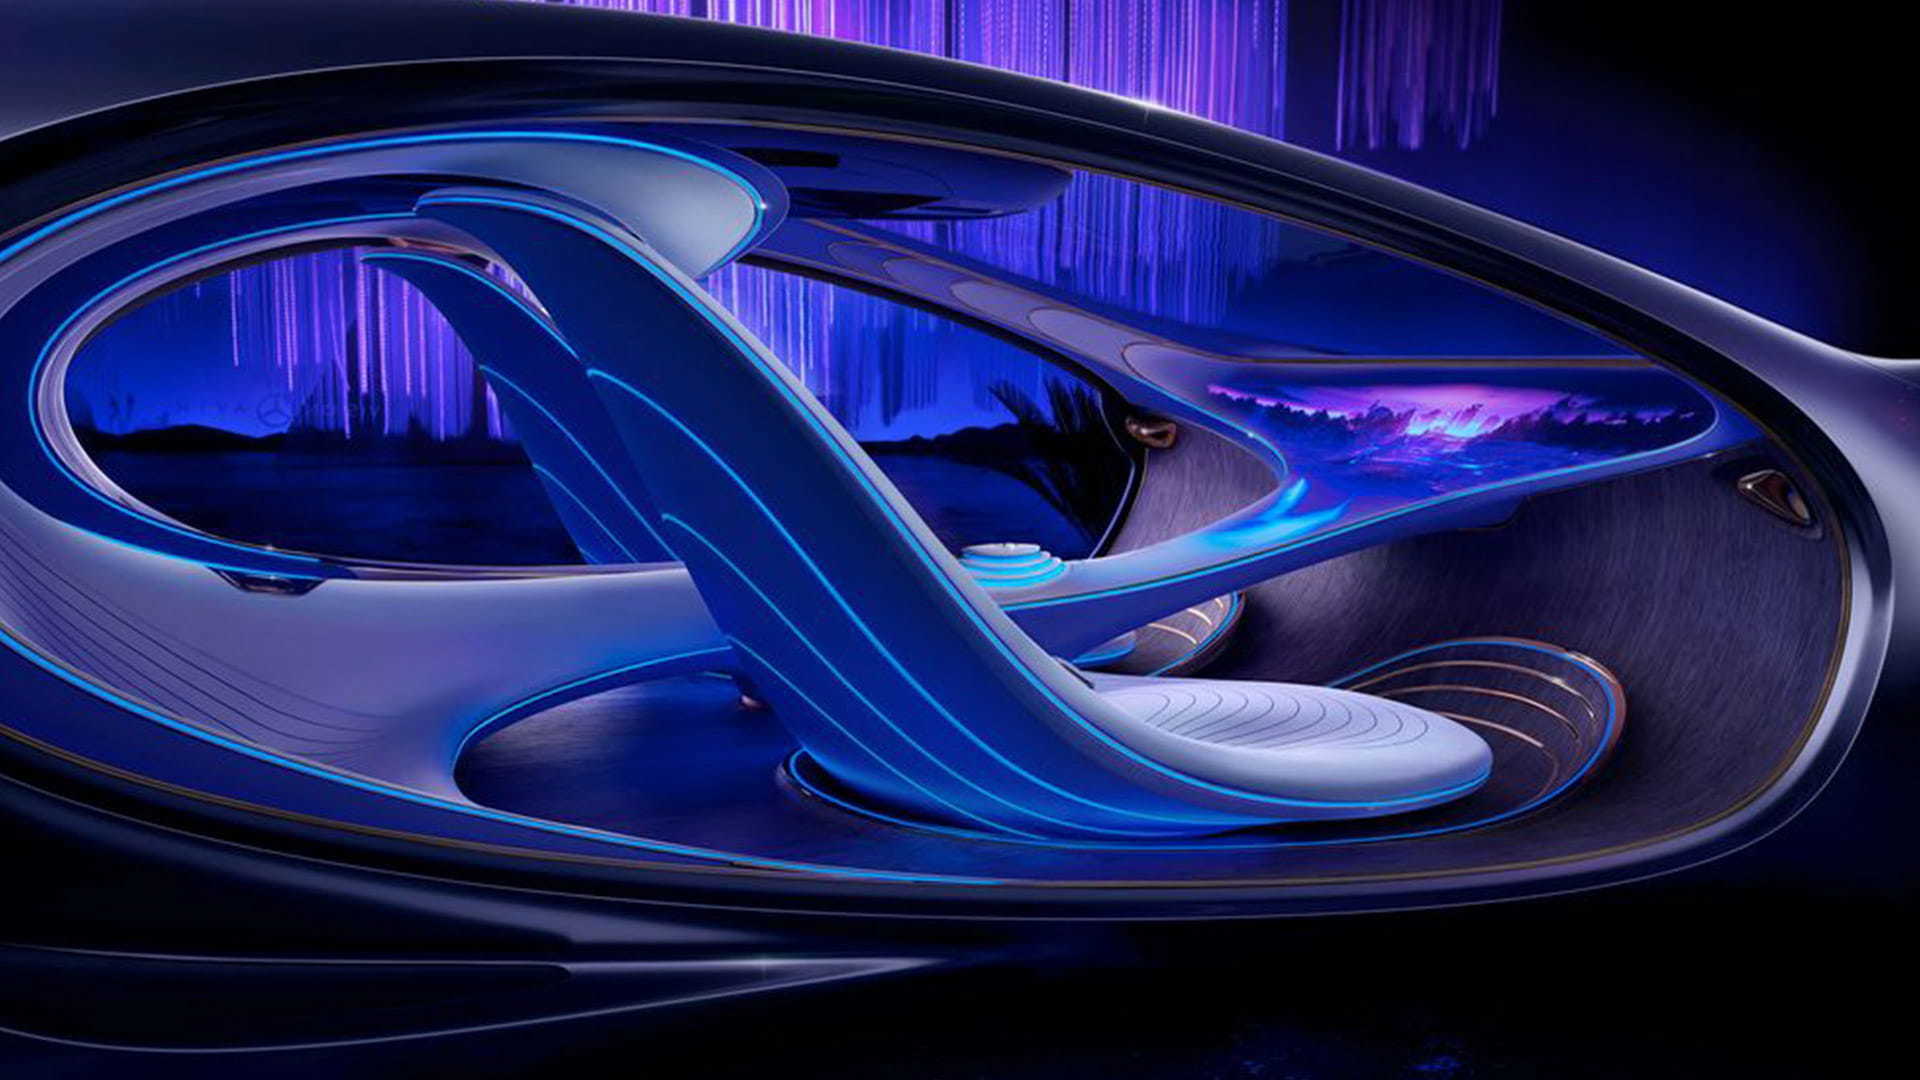 The seats and the ceiling of the car are decorated with a color-changing fabric inspired by the colors of Pandora.